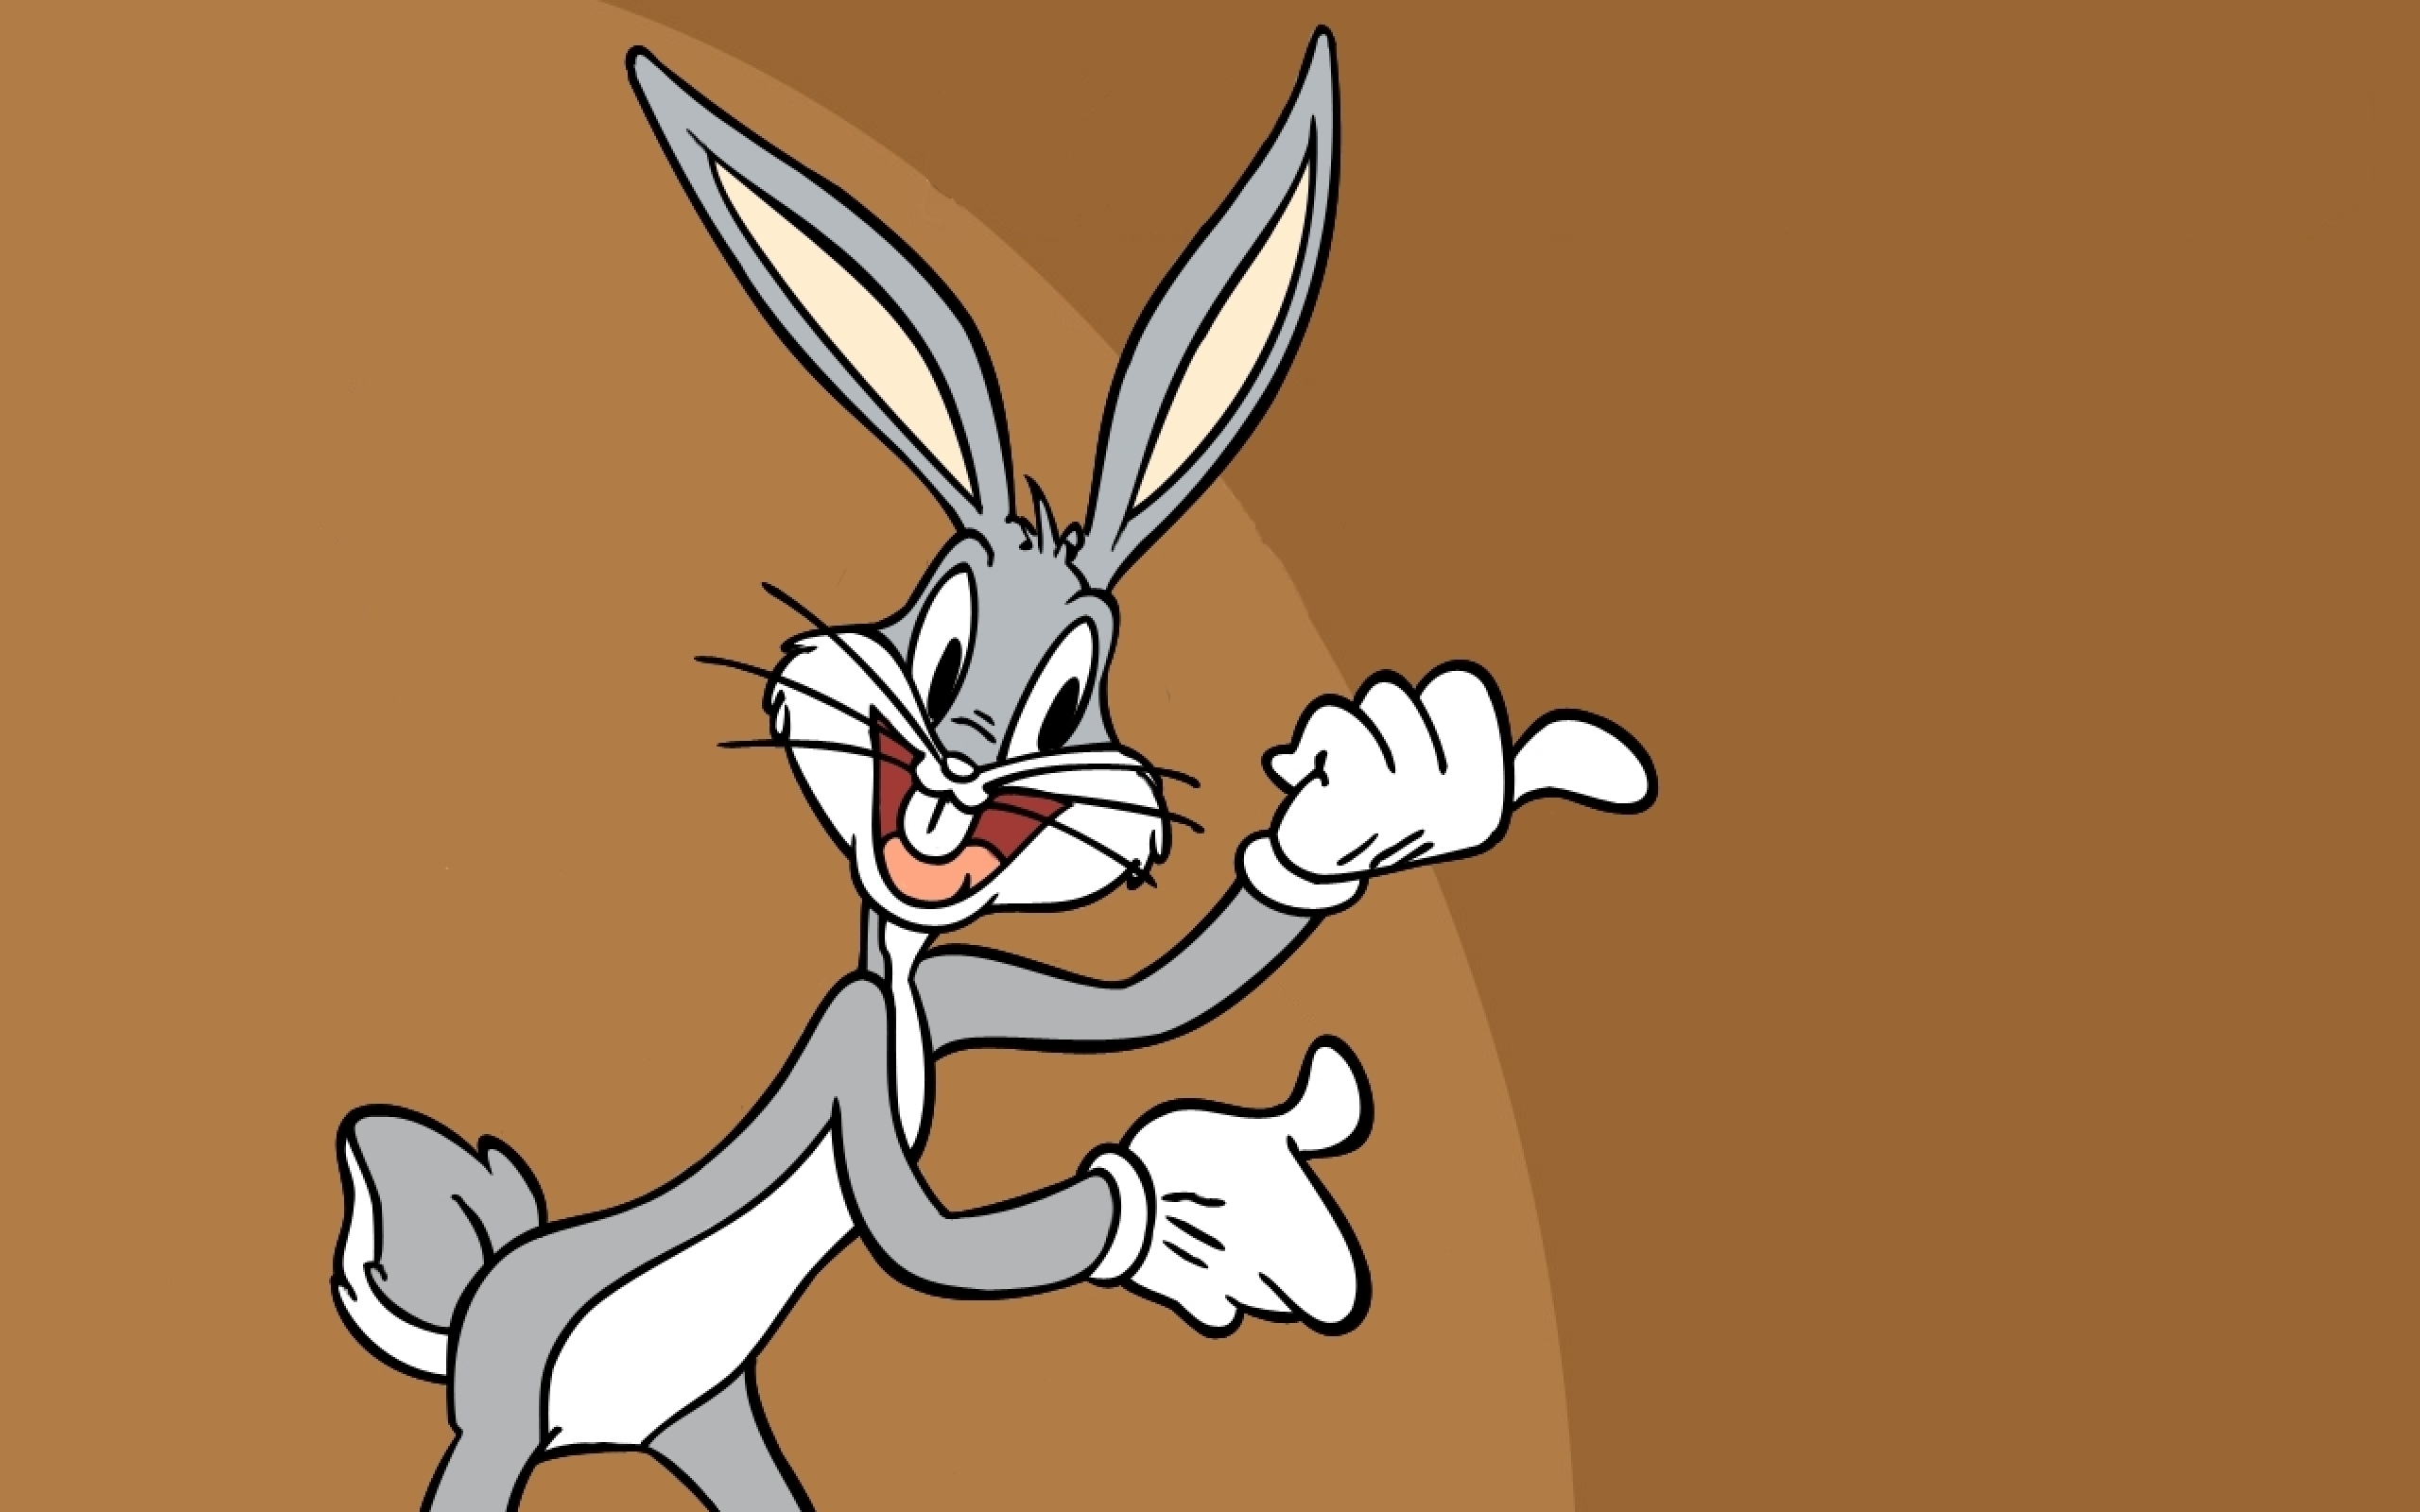 Bugs Bunny Wallpapers   Wallpaper High Definition High